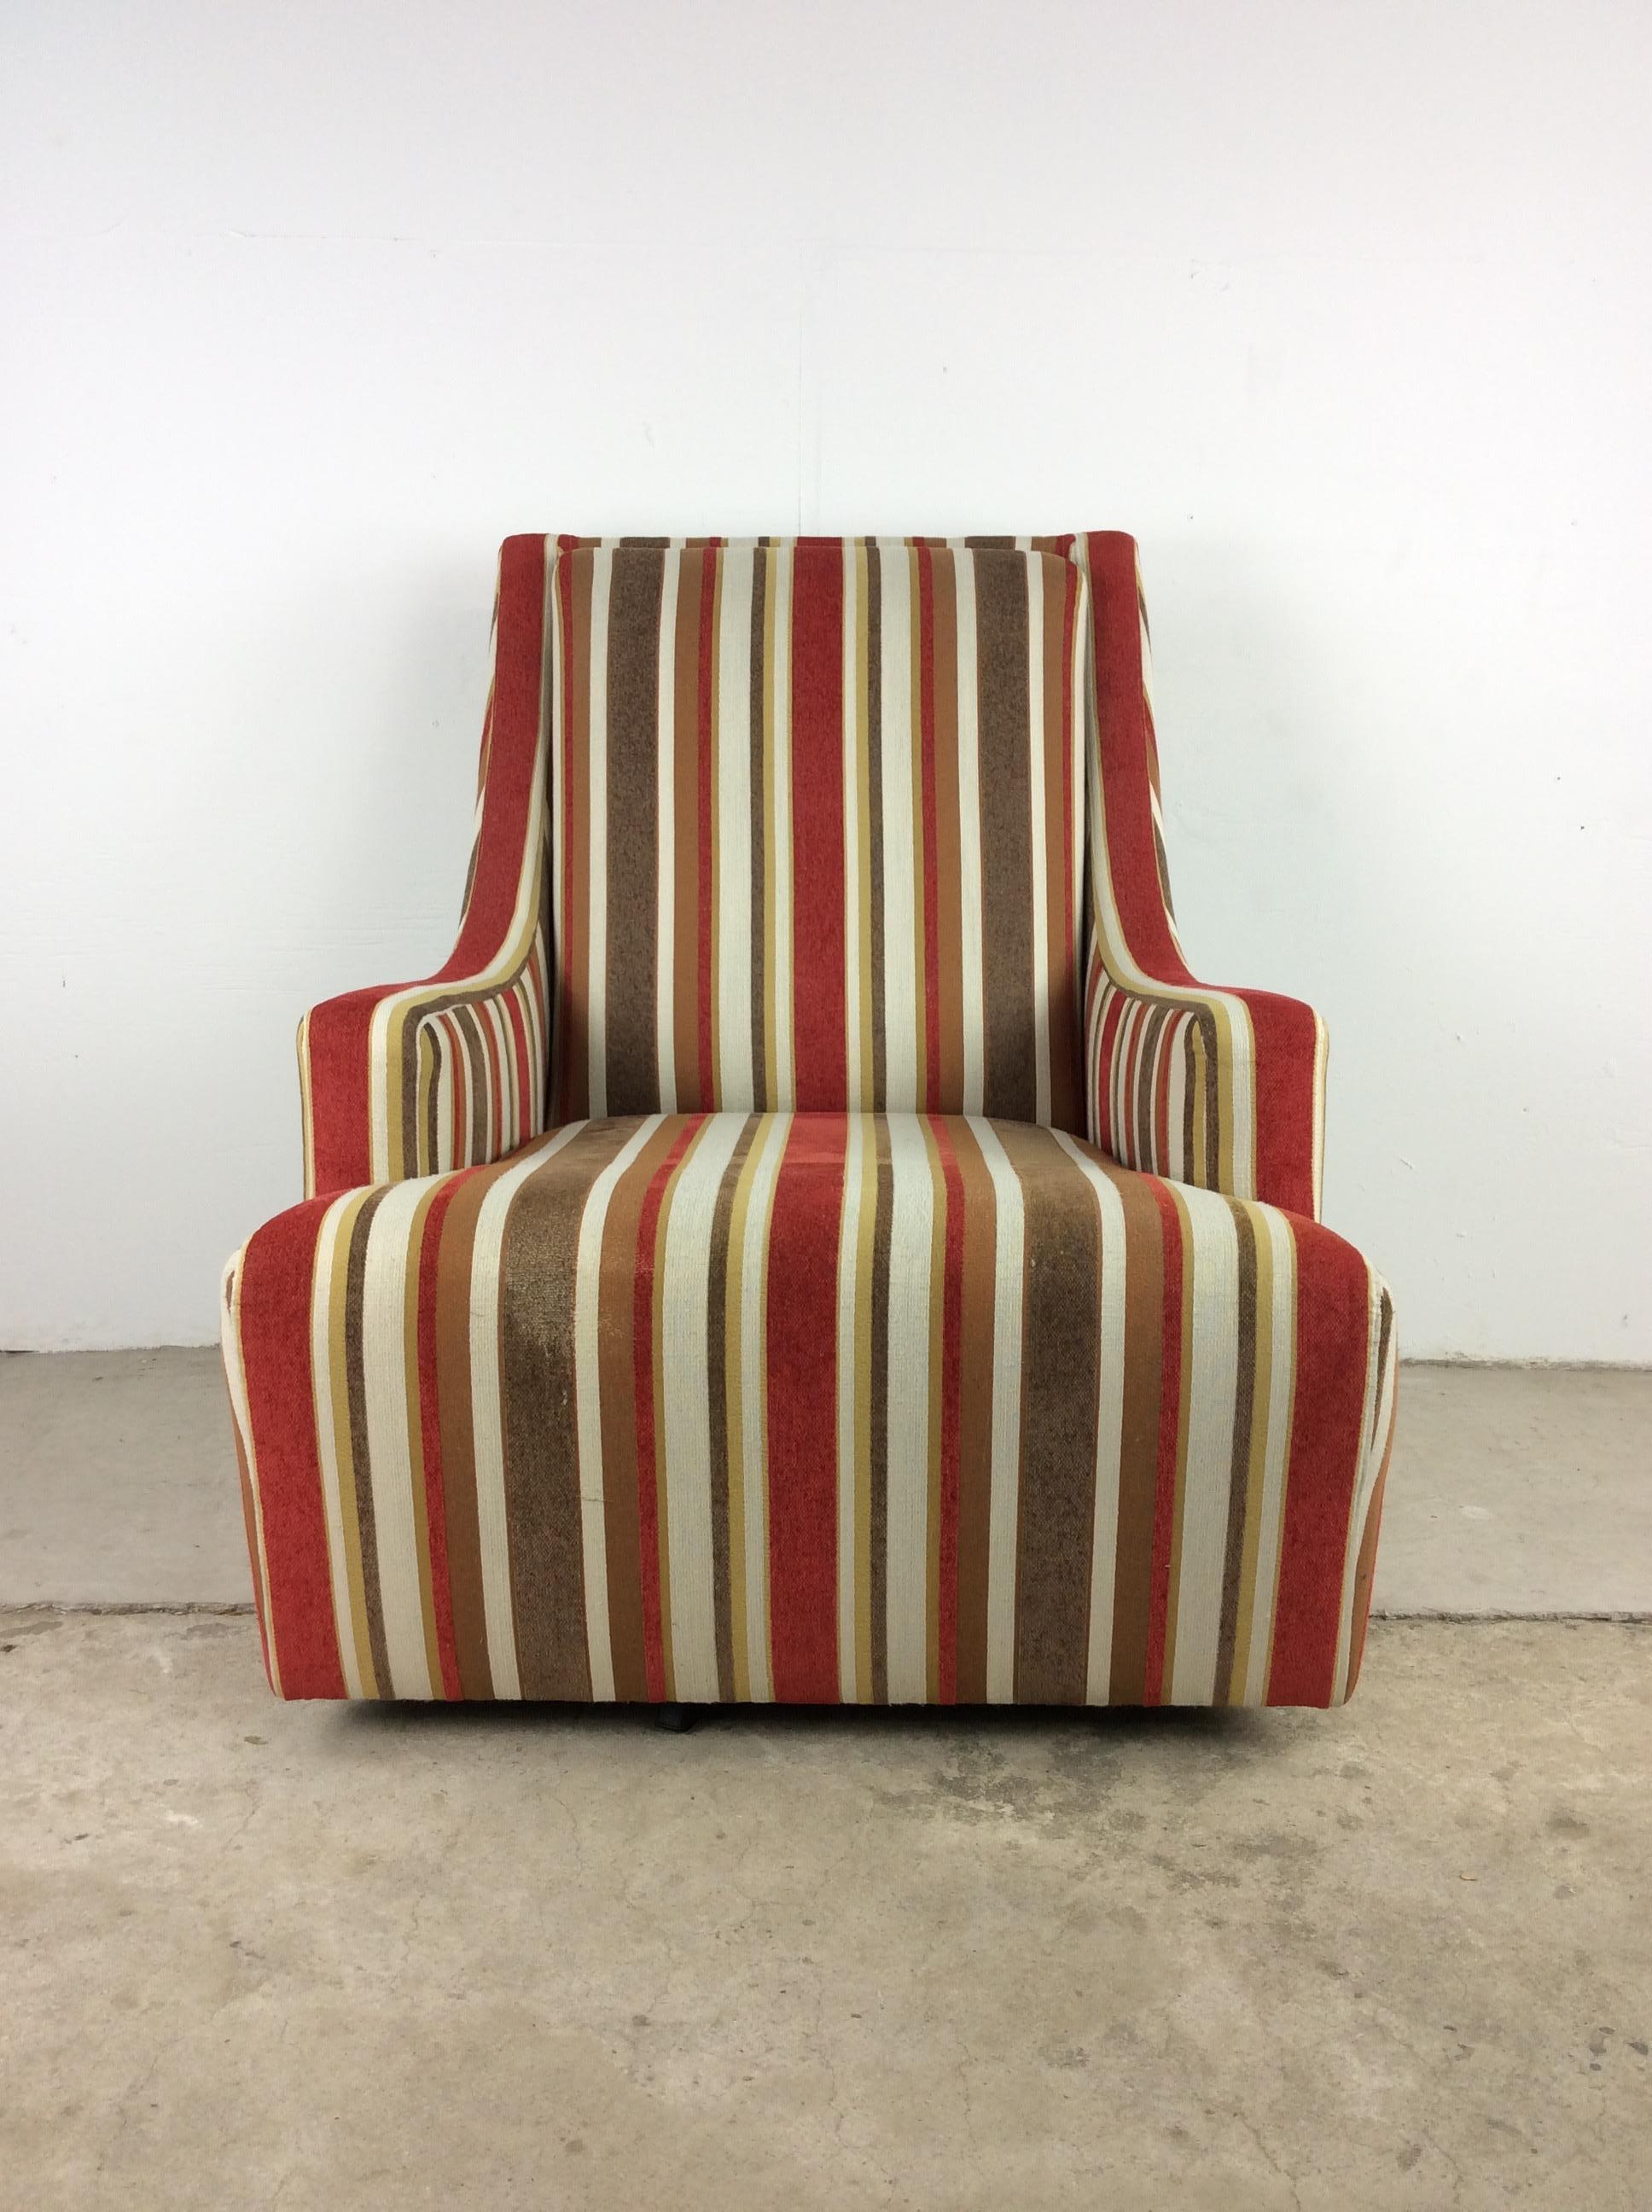 This mid century modern lounge chair features vintage striped upholstery, removable cushion, and swivel base. 

Pair of cane back arm chairs with matching upholstery available separately.

Dimensions: 30.5w 33d 36h 21ah 16sh

Condition: The striped